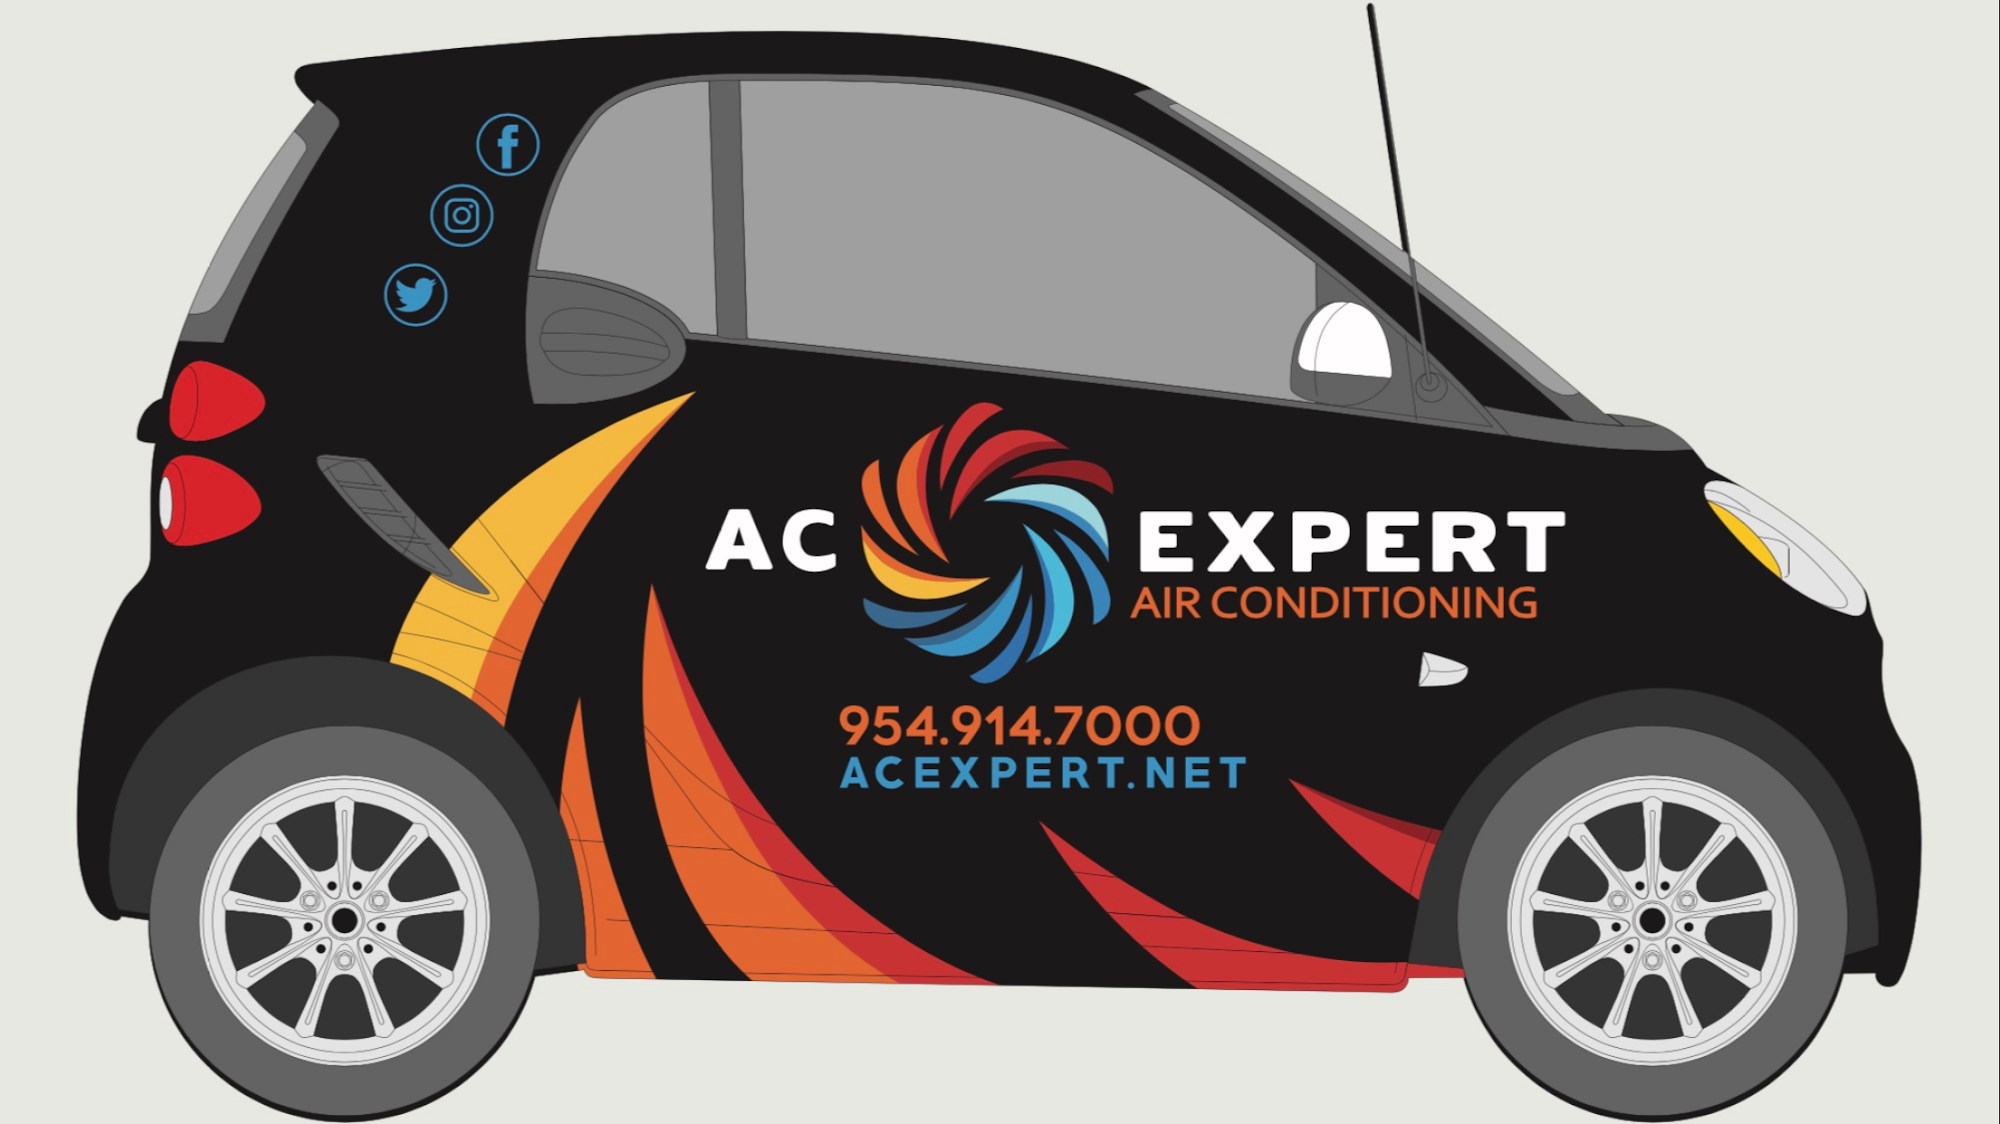 AC Expert - Air Conditioning